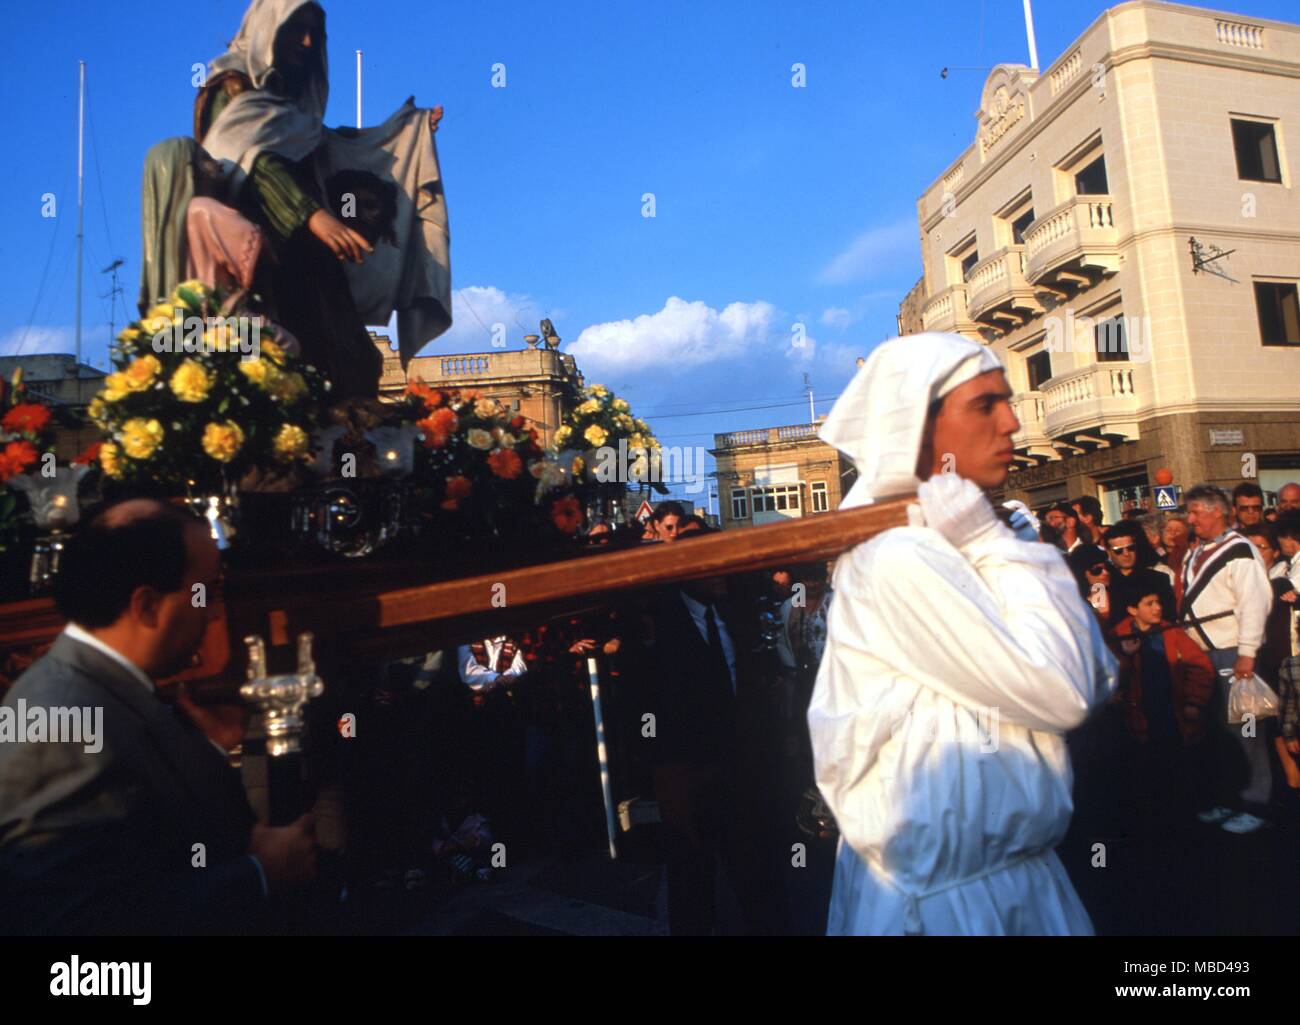 Festivals - Easter - The Good Friday processional at Mosta, on Malta. Penitents carry the statue of the Veronica, with the image of Christ's face on the fabric. - ©Charles Walker / Stock Photo